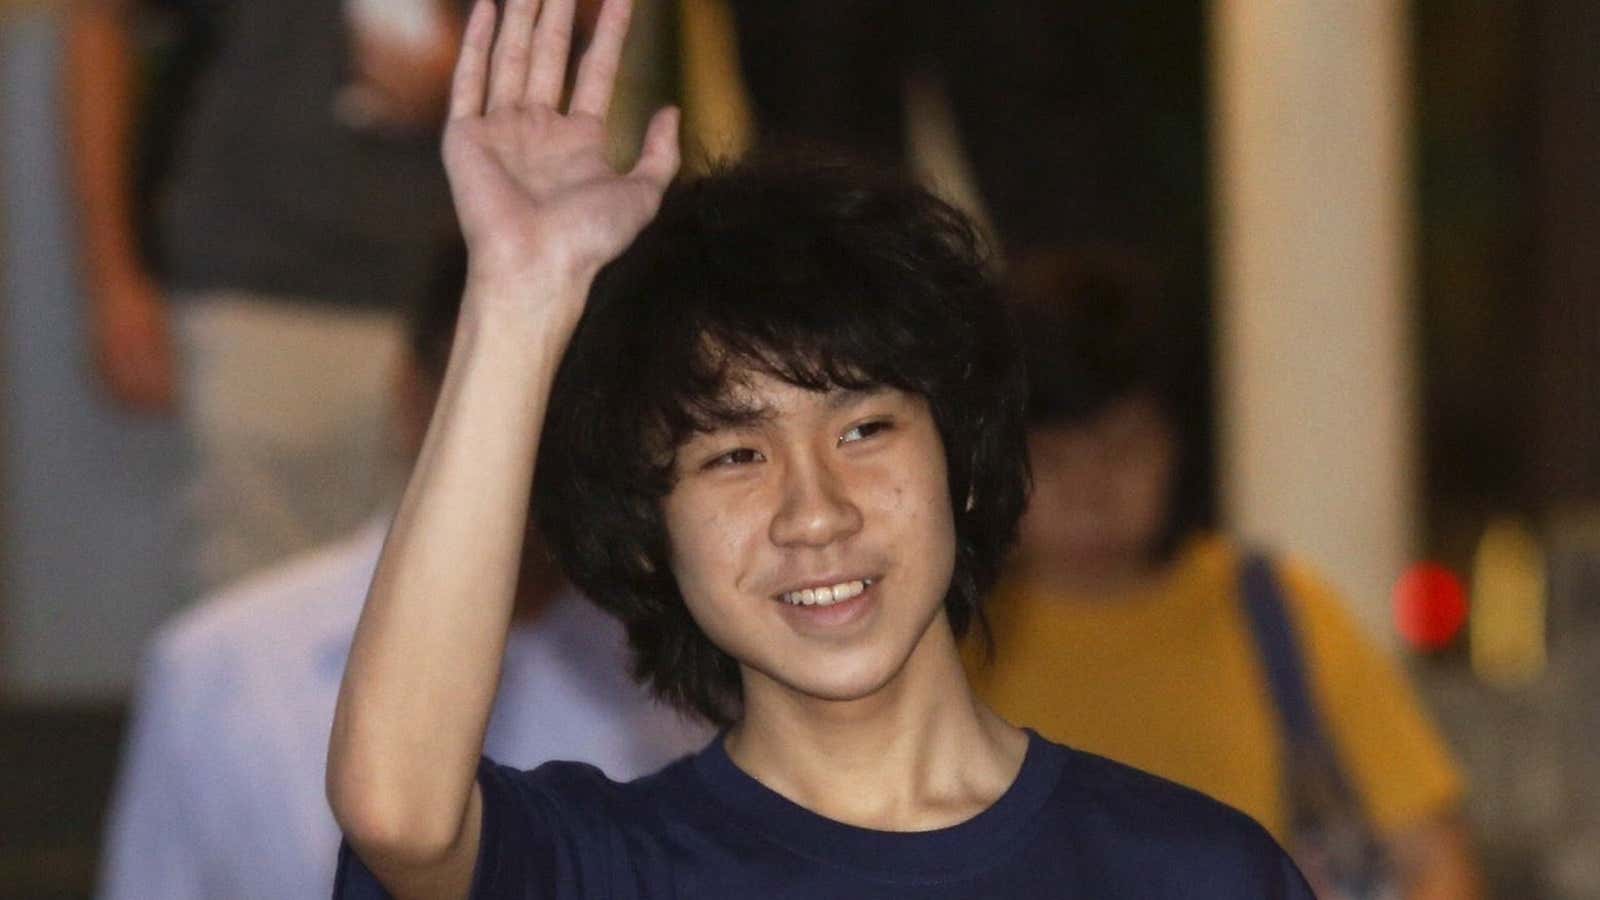 Amos Yee after his trial last month.